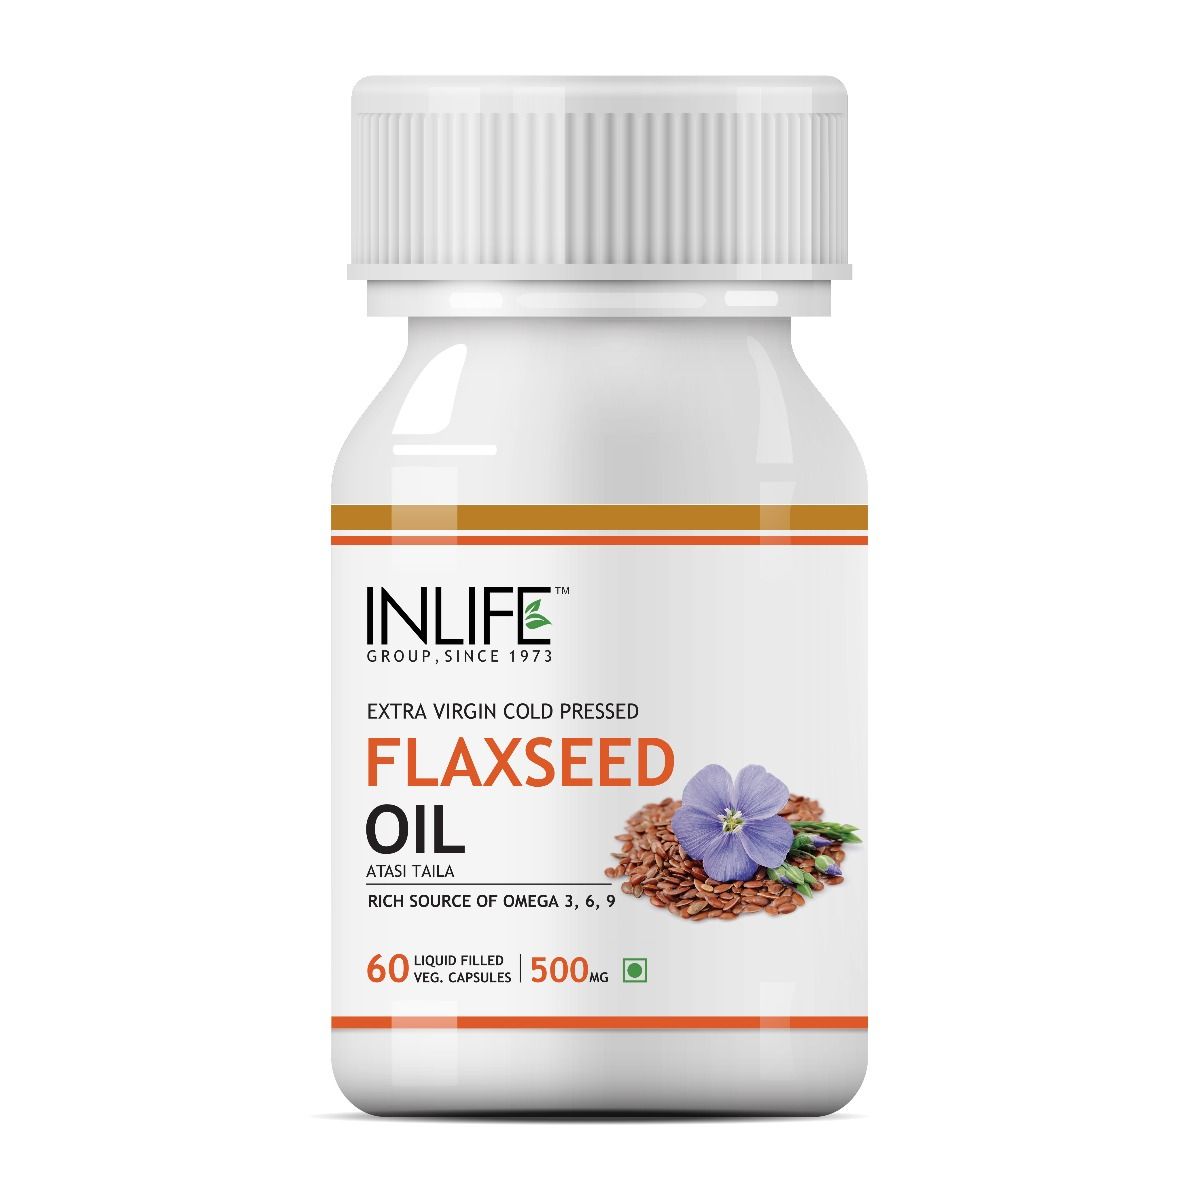 Inlife Flaxseed Oil 500 mg, 60 Capsules, Pack of 1 